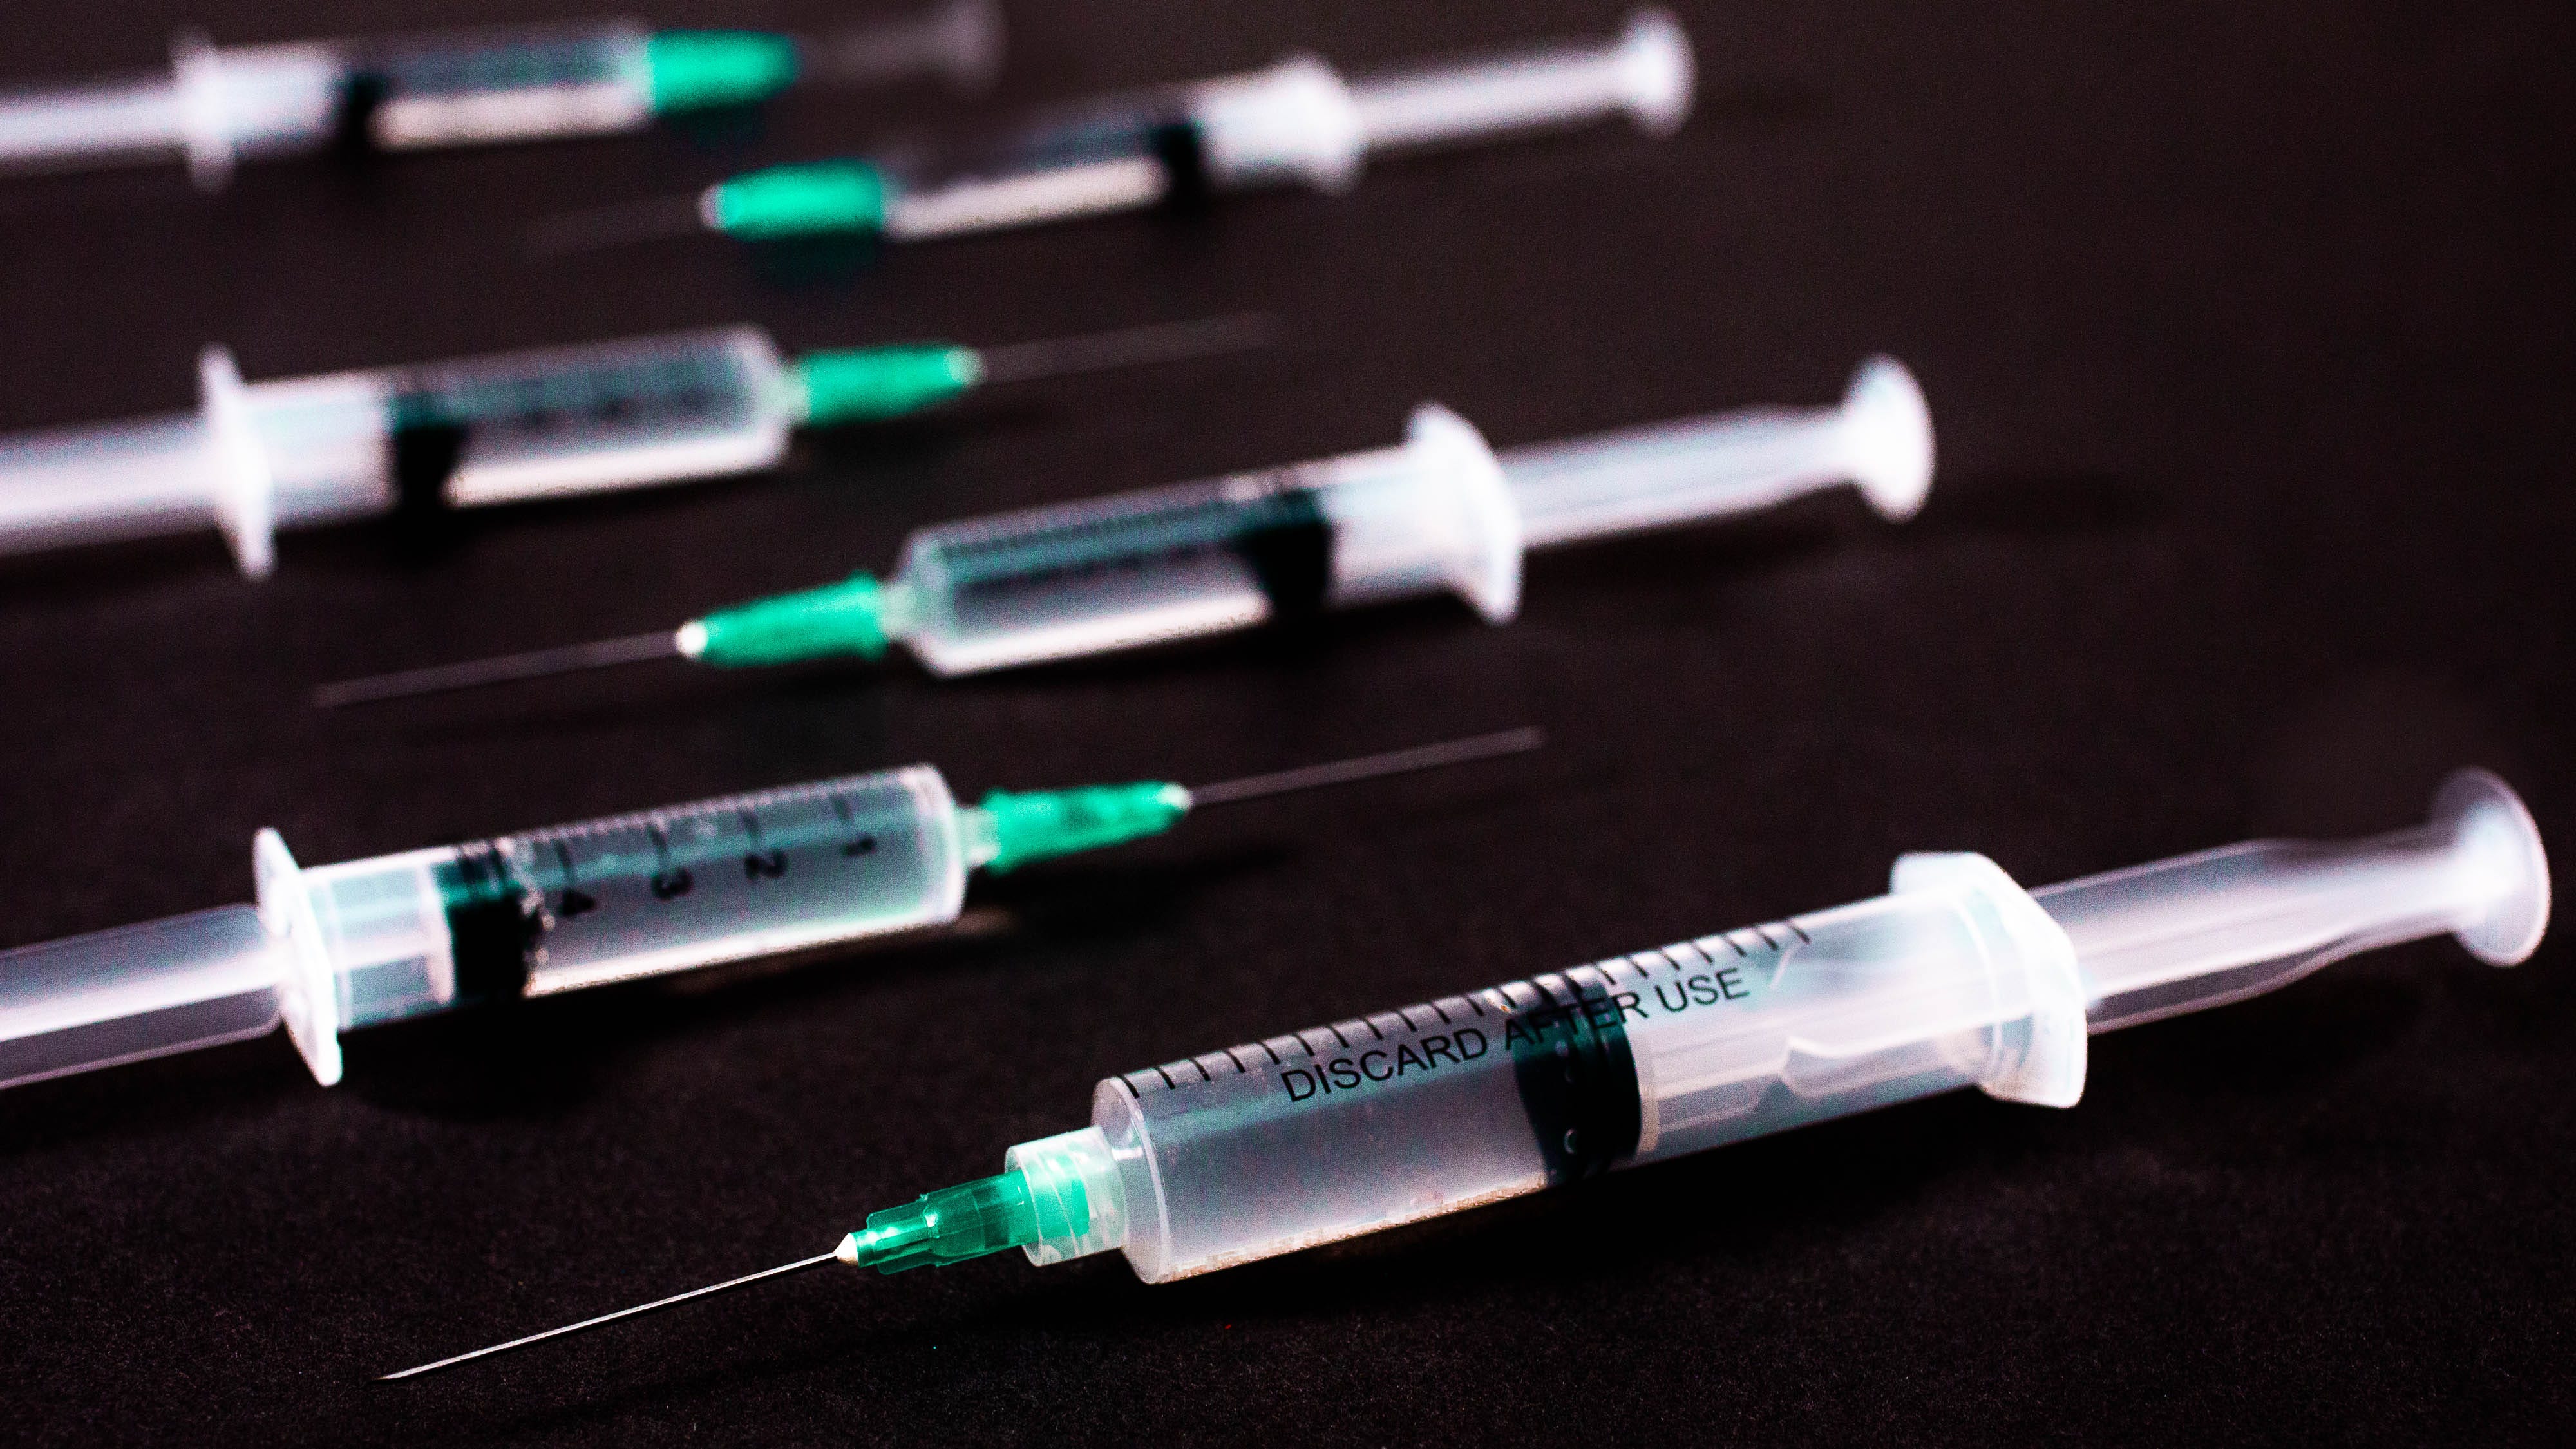 covid-19-vaccines-regular-endless-booster-shots-syringes-winter-2021-cnet-102